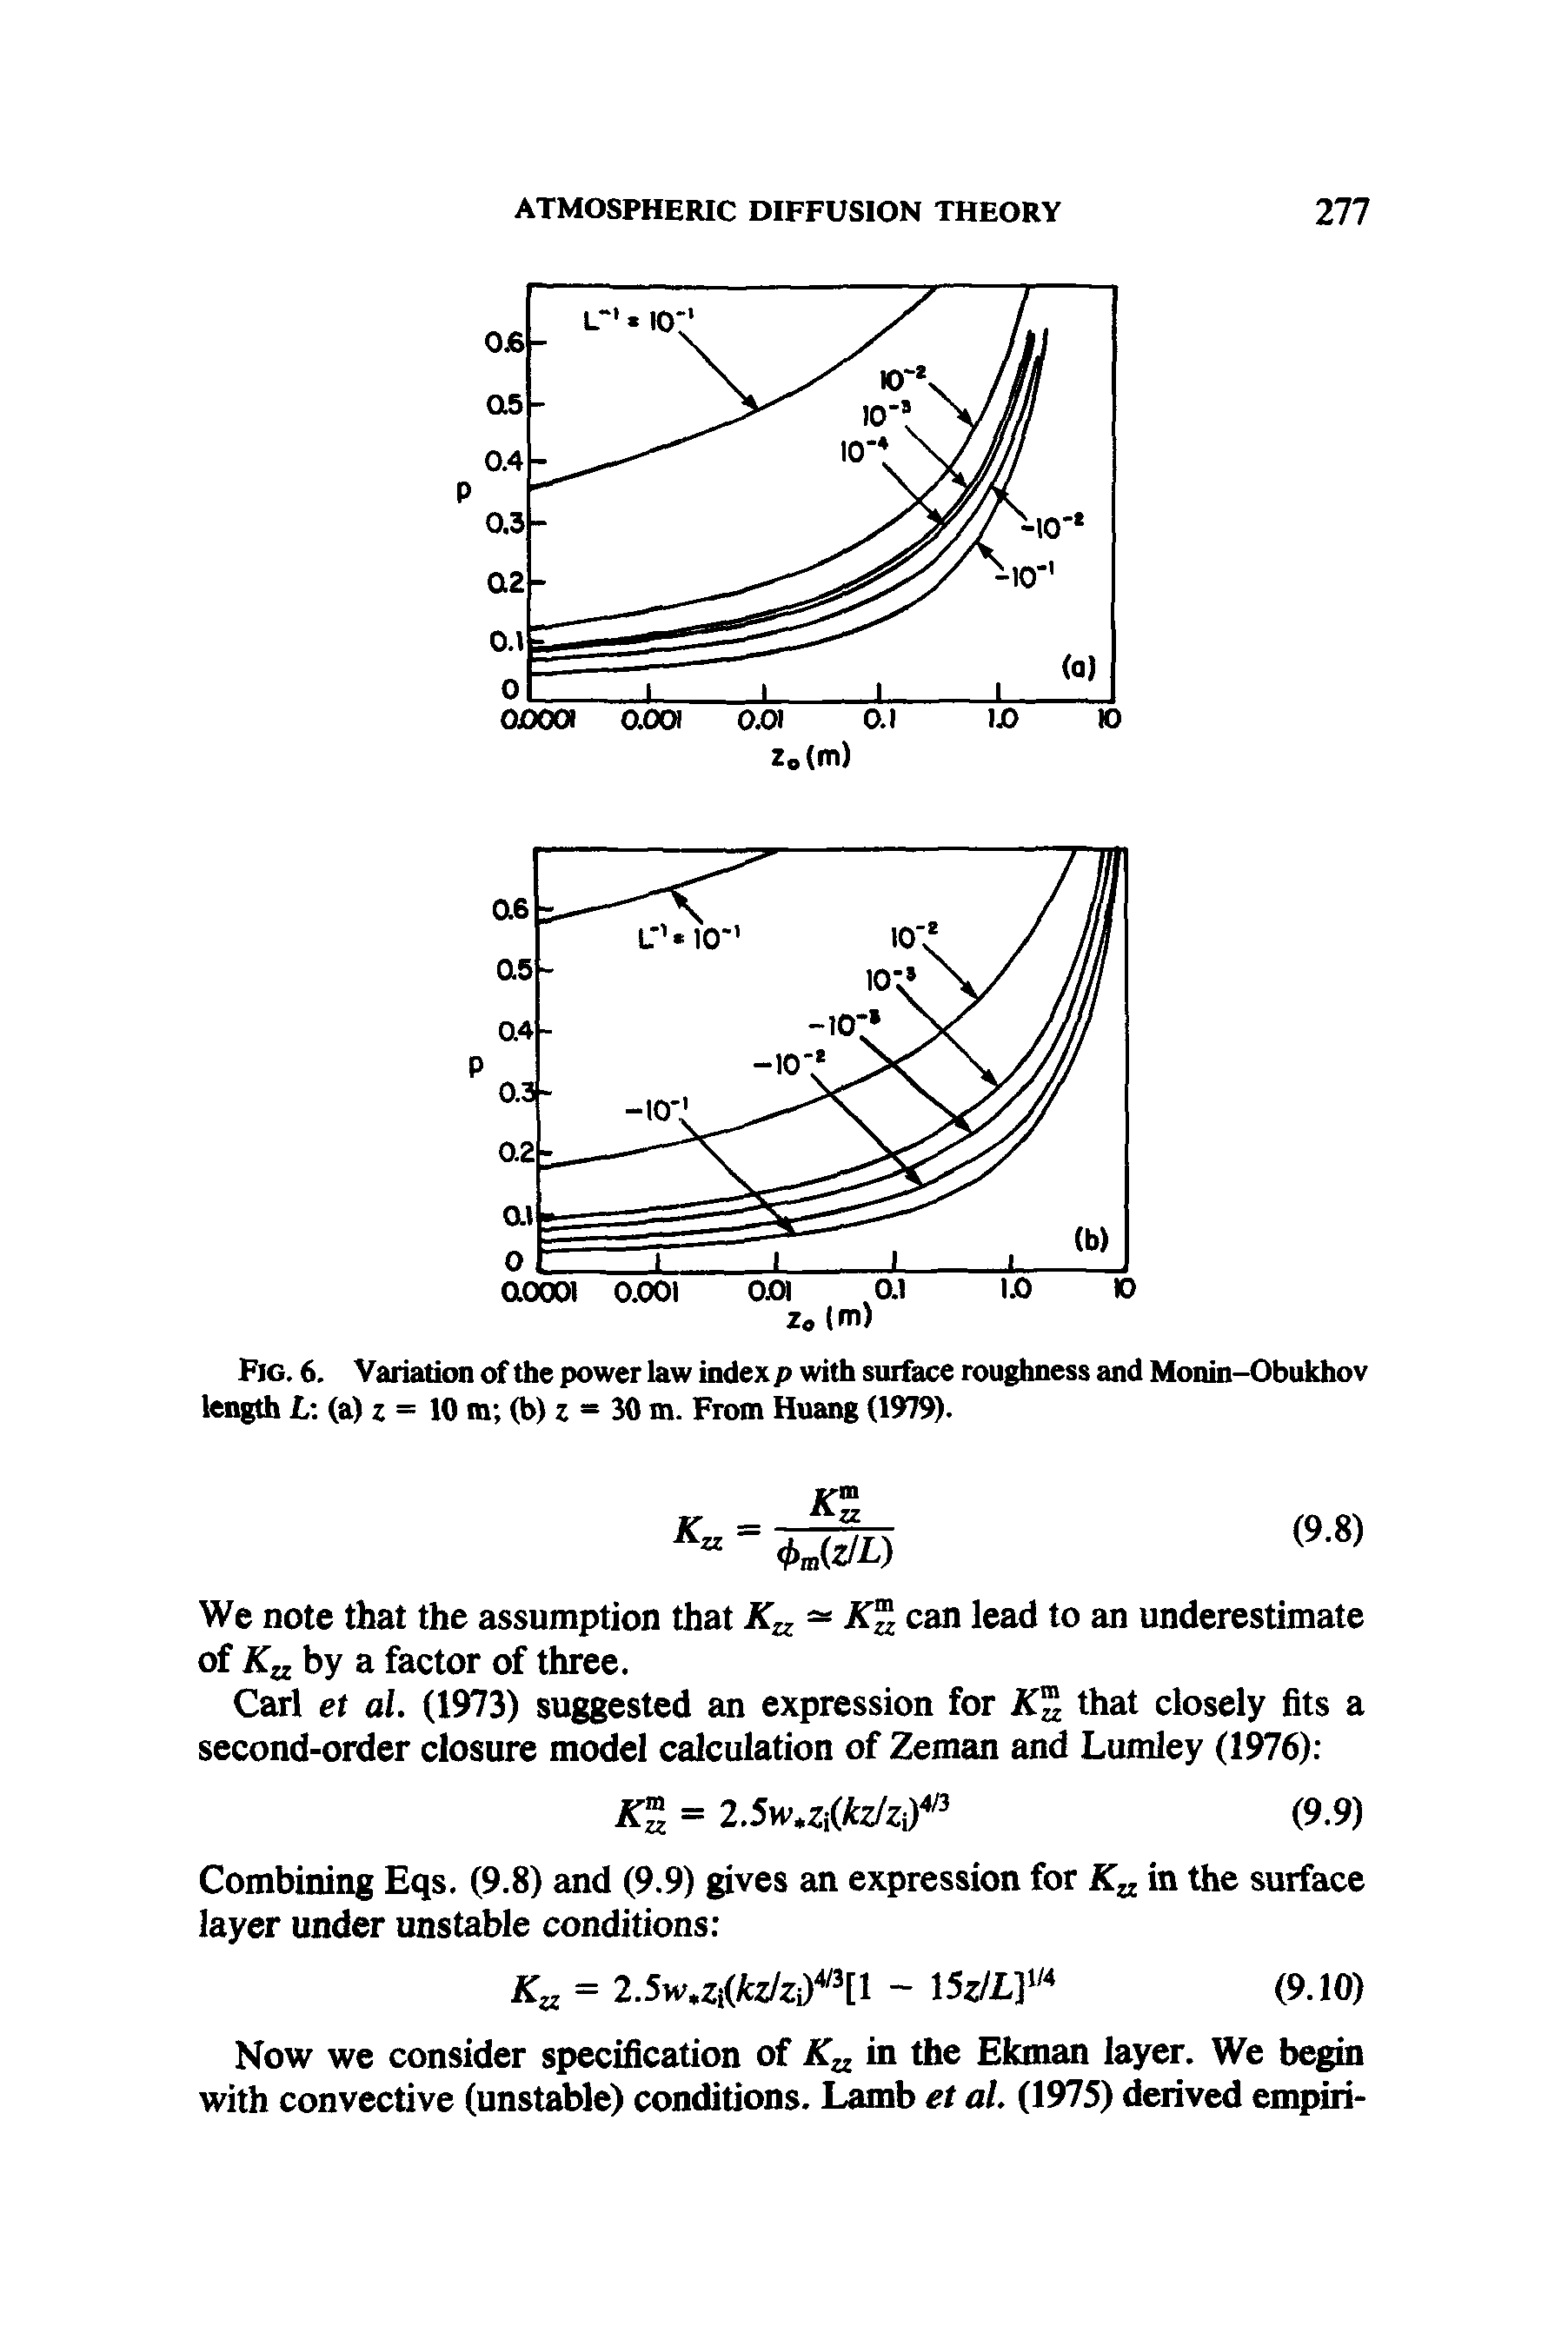 Fig. 6. Variation of the power law index p with surface roughness and Monin-Obukhov length L (a) z = 10 m (b) z = 30 m. From Huang (1979).